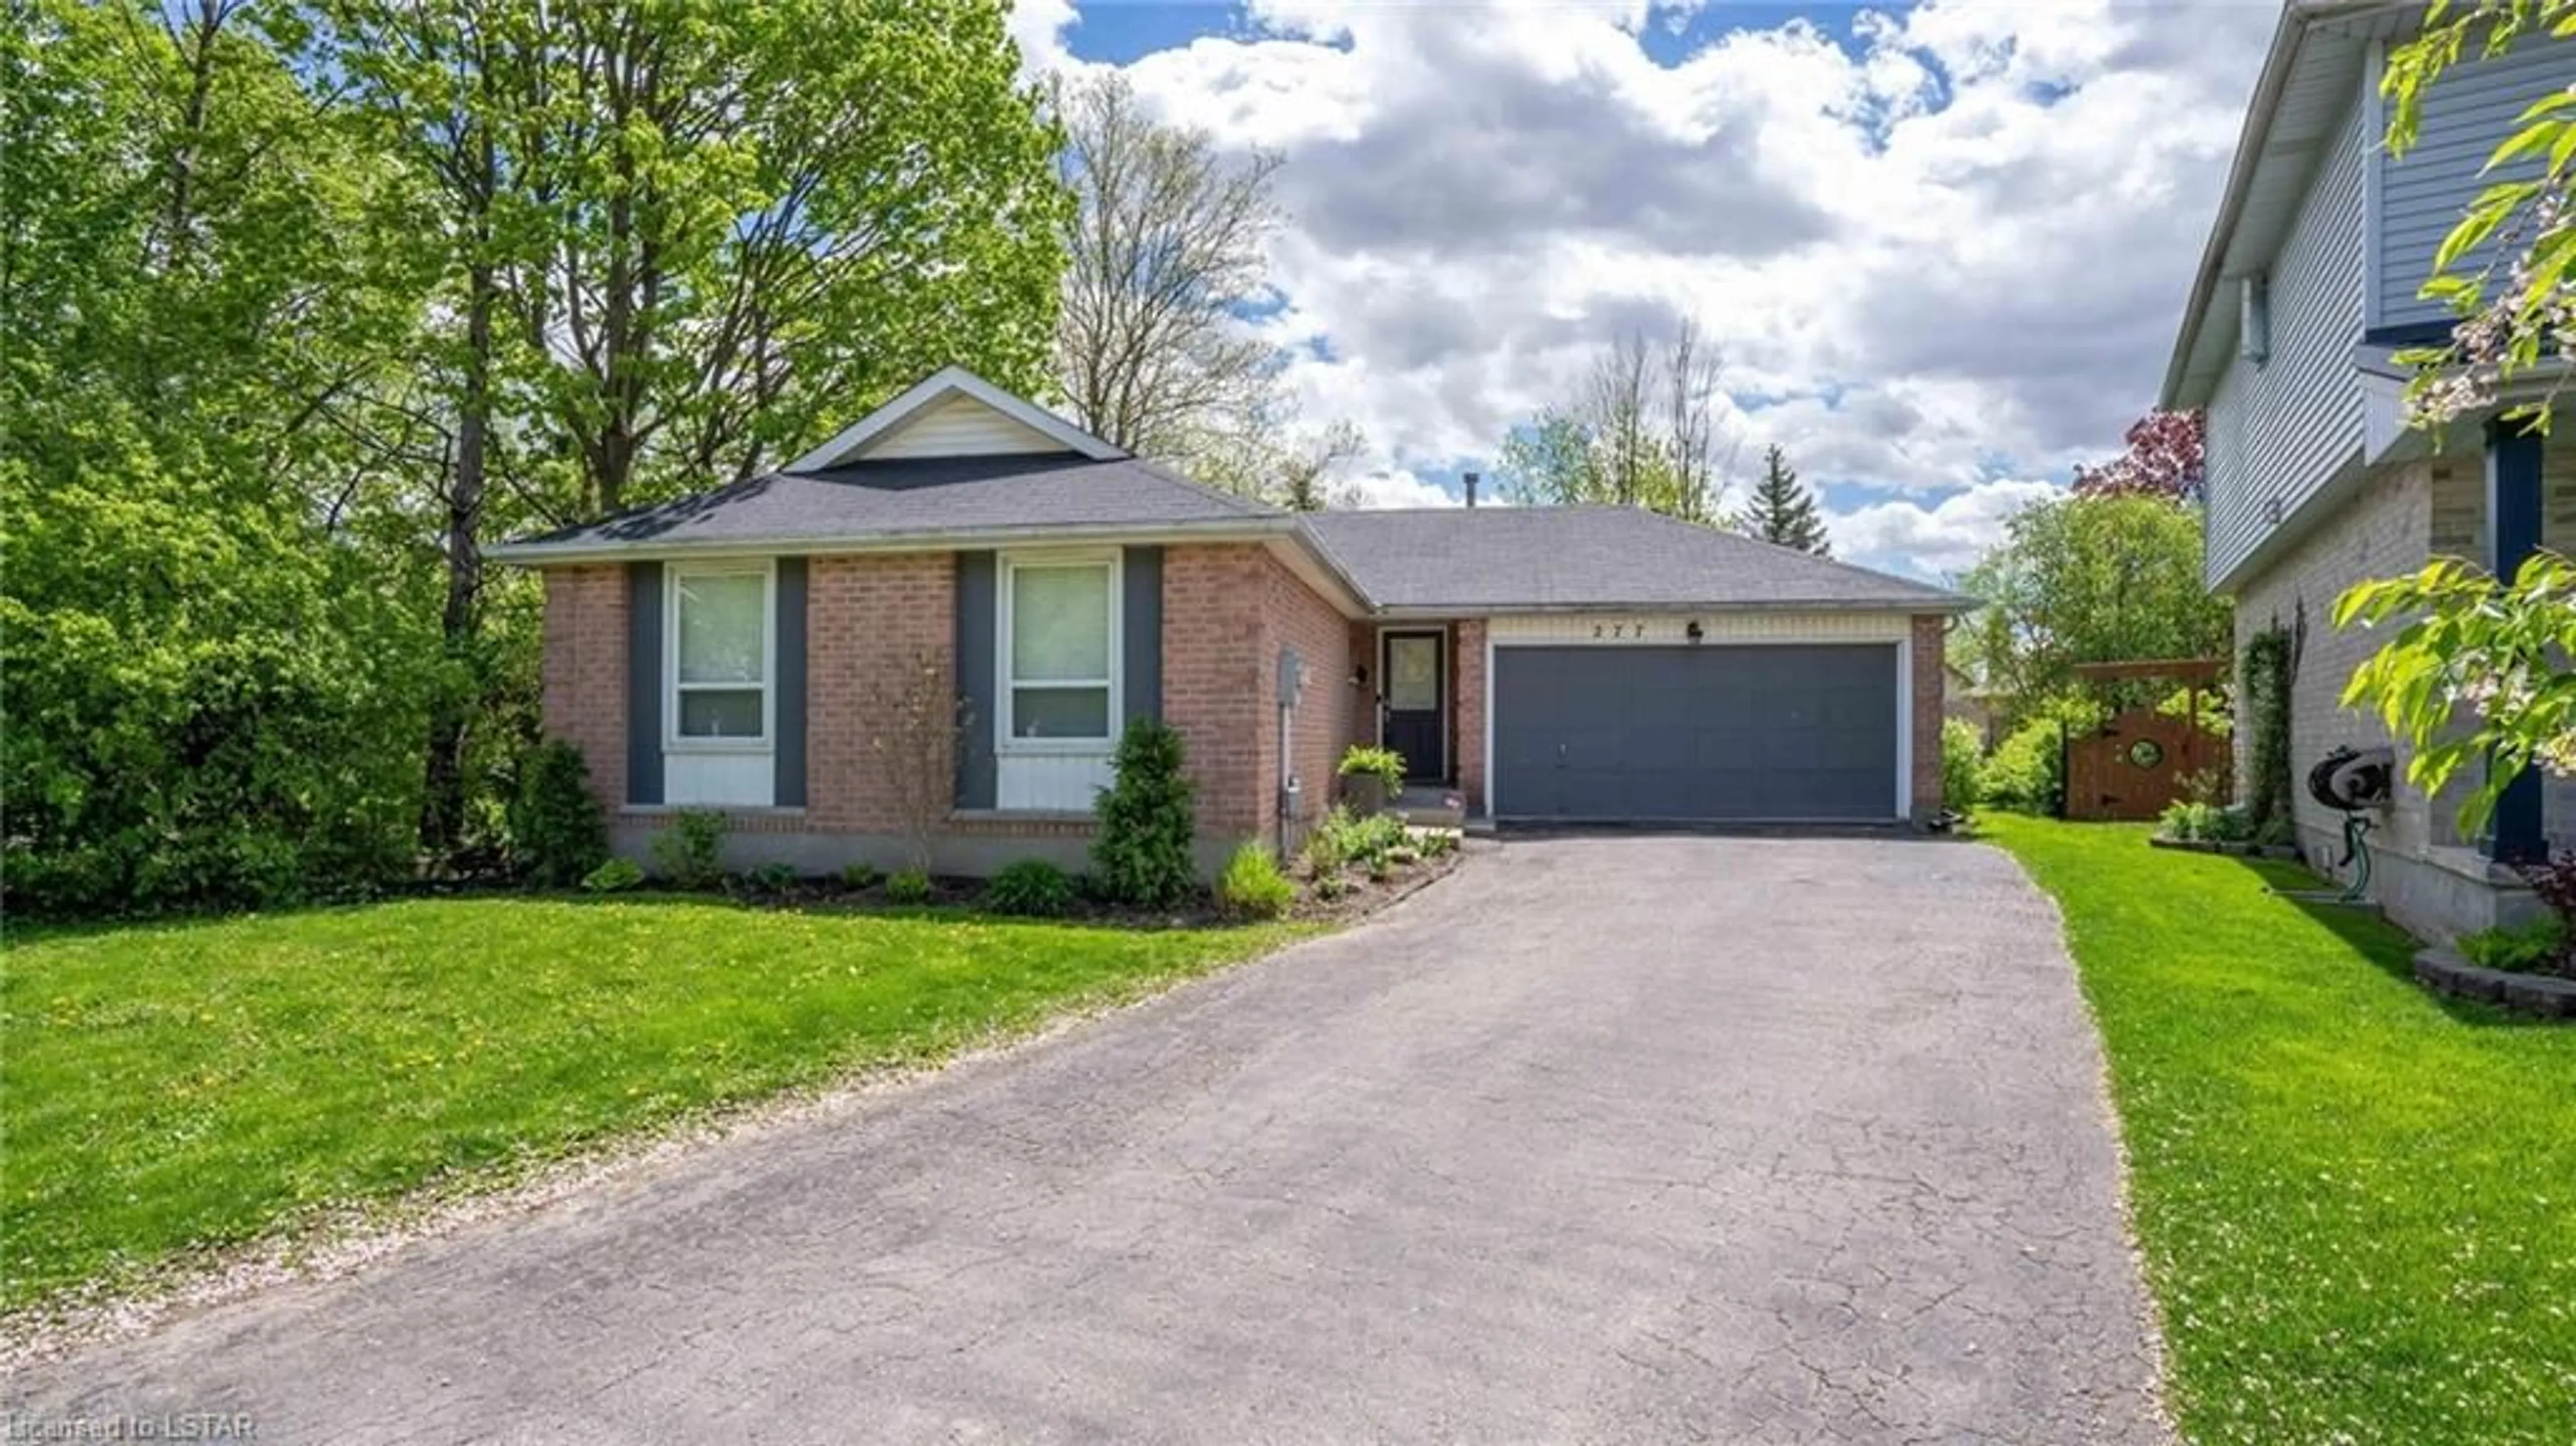 Frontside or backside of a home for 277 Ferndale Ave, London Ontario N6C 5L1